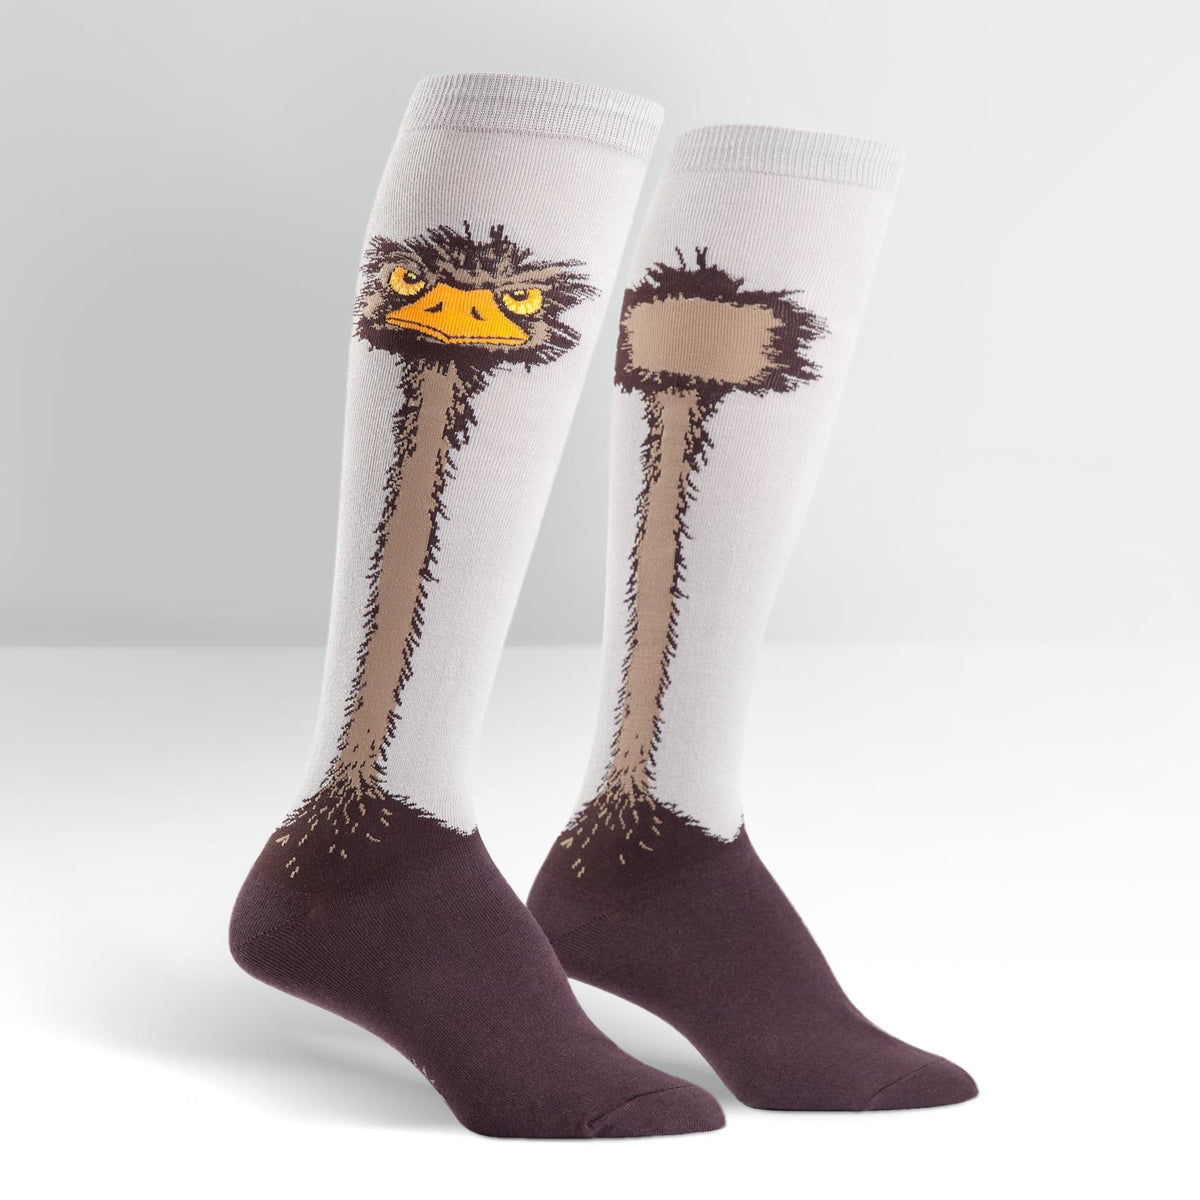 Sock It To Me Ostrich women&#39;s and extra-stretchy knee high socks featuring gray and brown socks with ostrich and its long neck the length of the sock. Socks shown on display feet. 